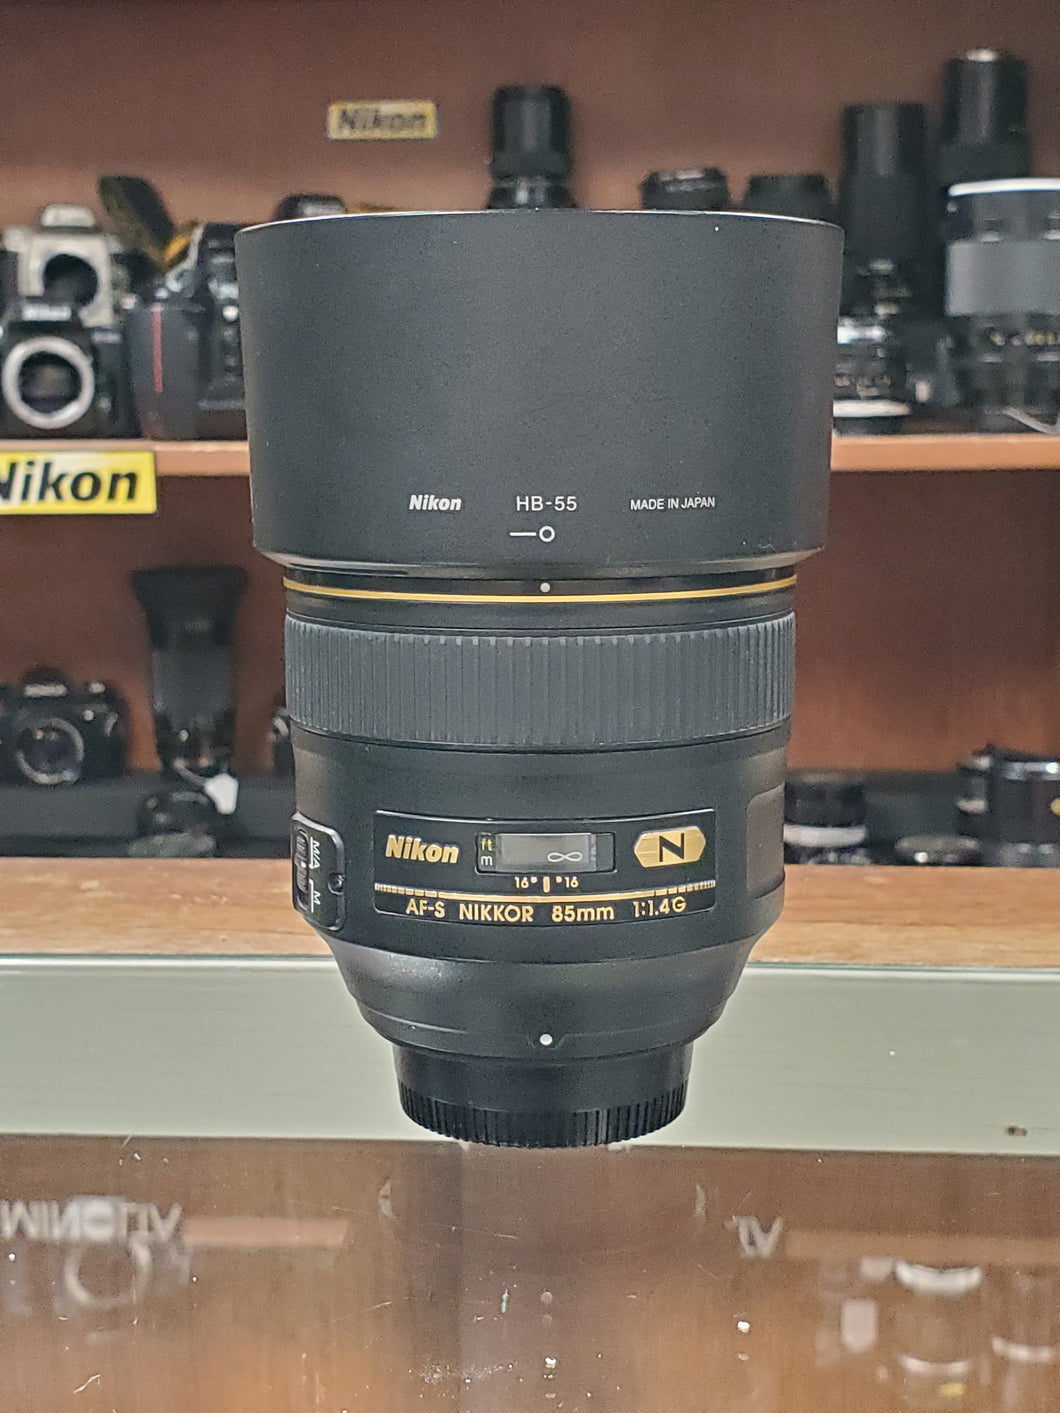 Nikon 85mm f/1.4G AF-S FX Lens - Full Frame Prime - Used Condition 9/10 - Paramount Camera & Repair